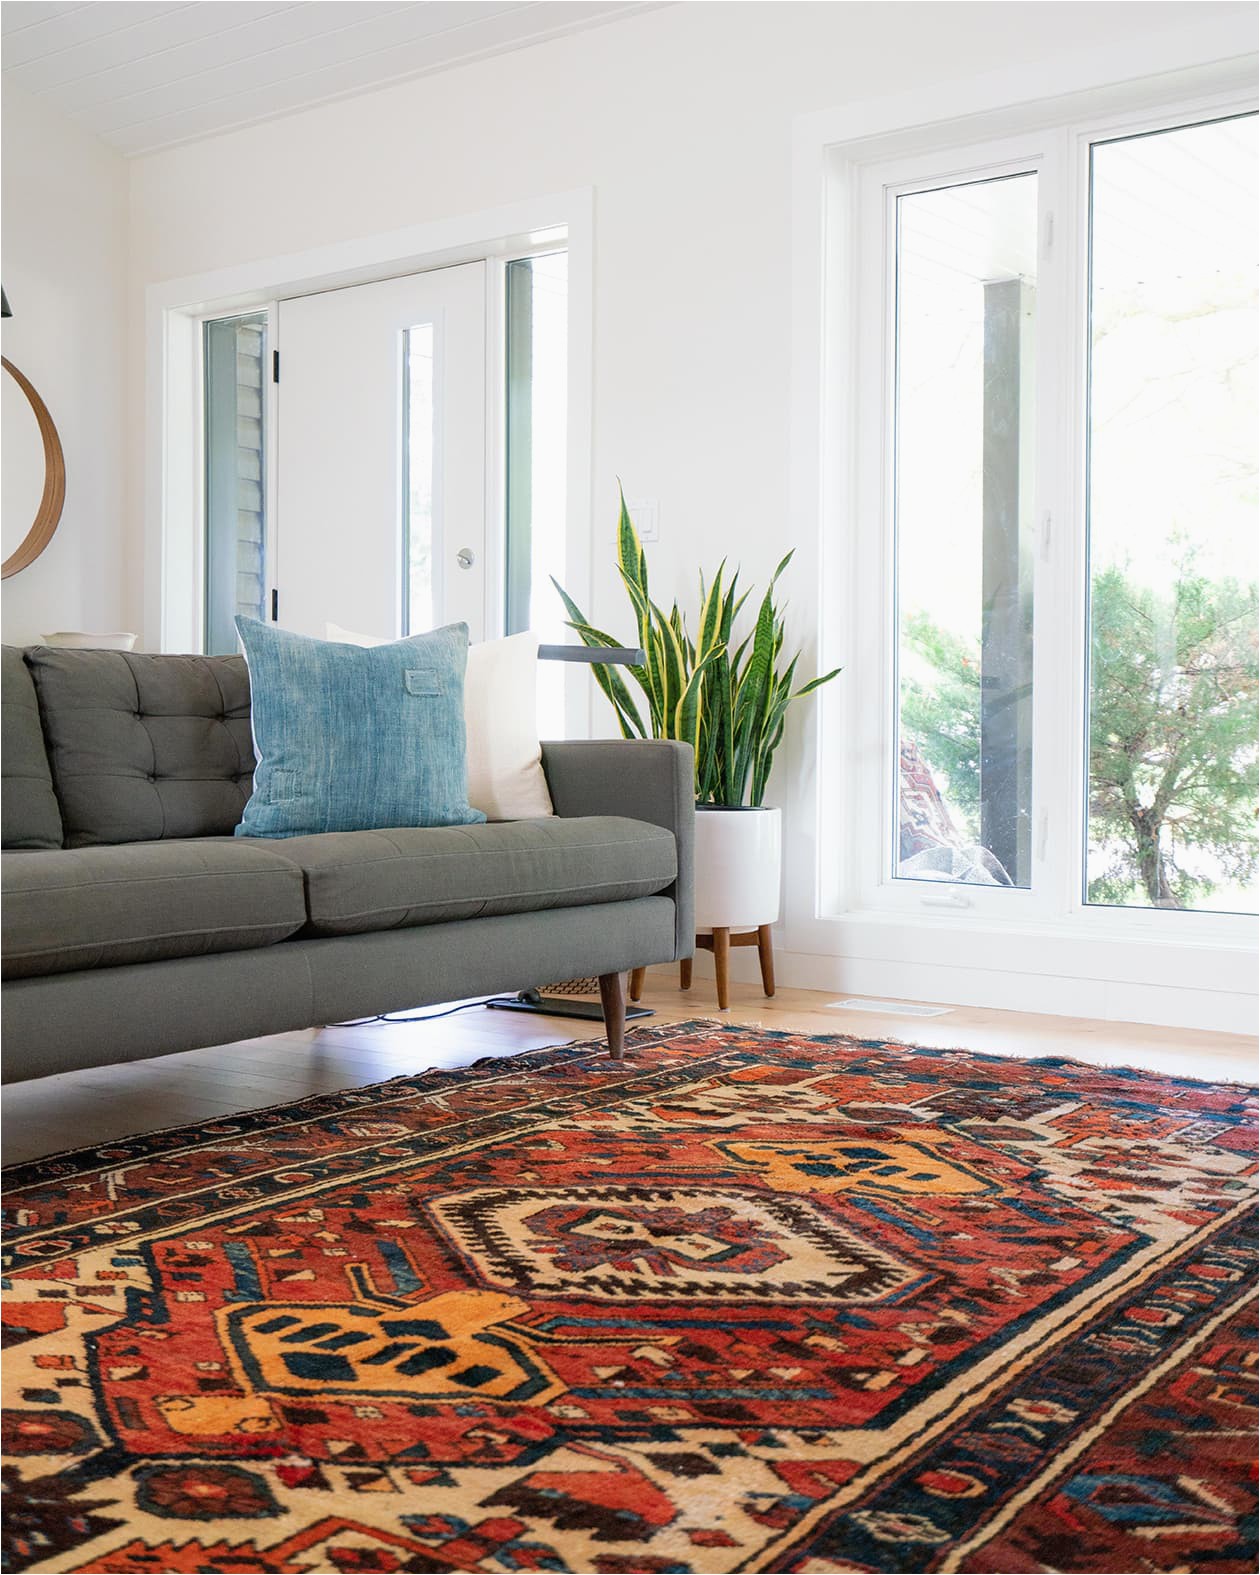 Places to Get area Rugs Cleaned area Rug Cleaning toronto Kasra Persian Rugs toronto